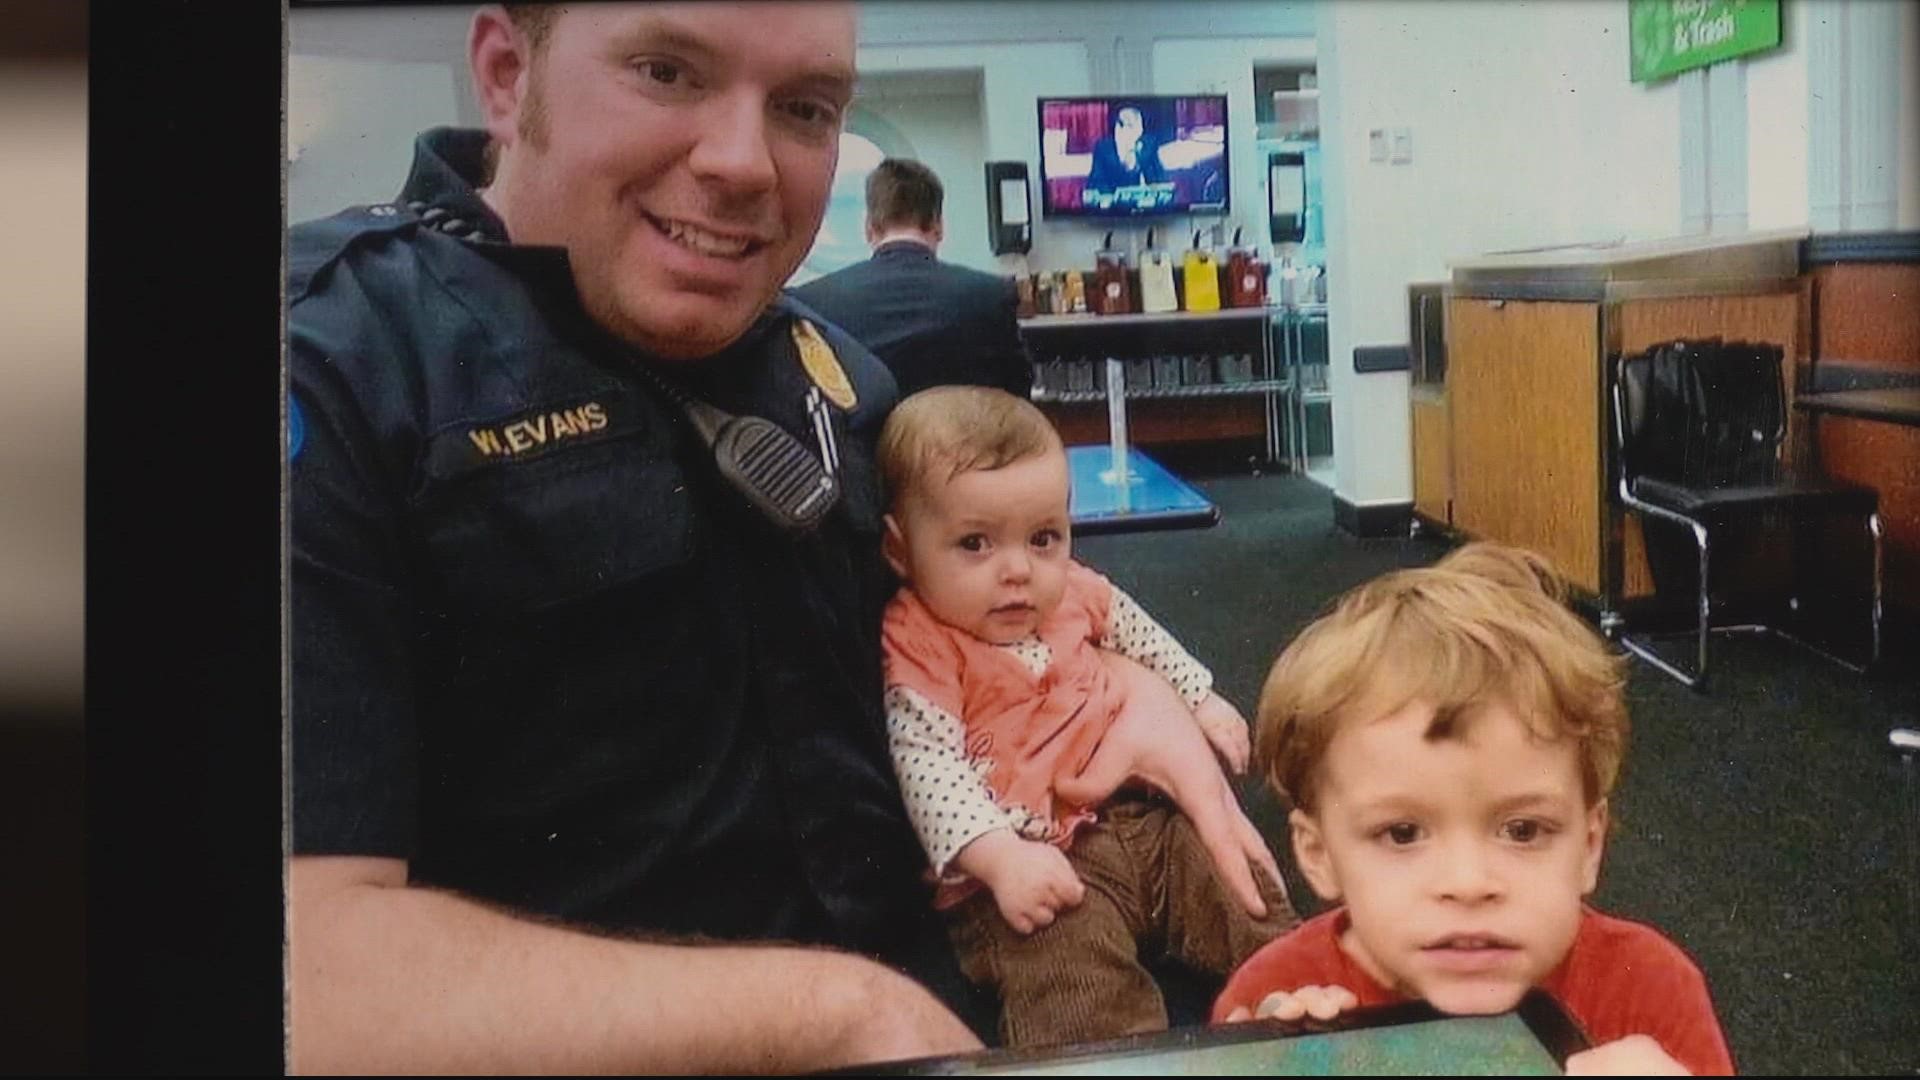 An unexplained act of violence ended the life of US Capitol Police Officer Billy Evans. It also left two young children without their father.